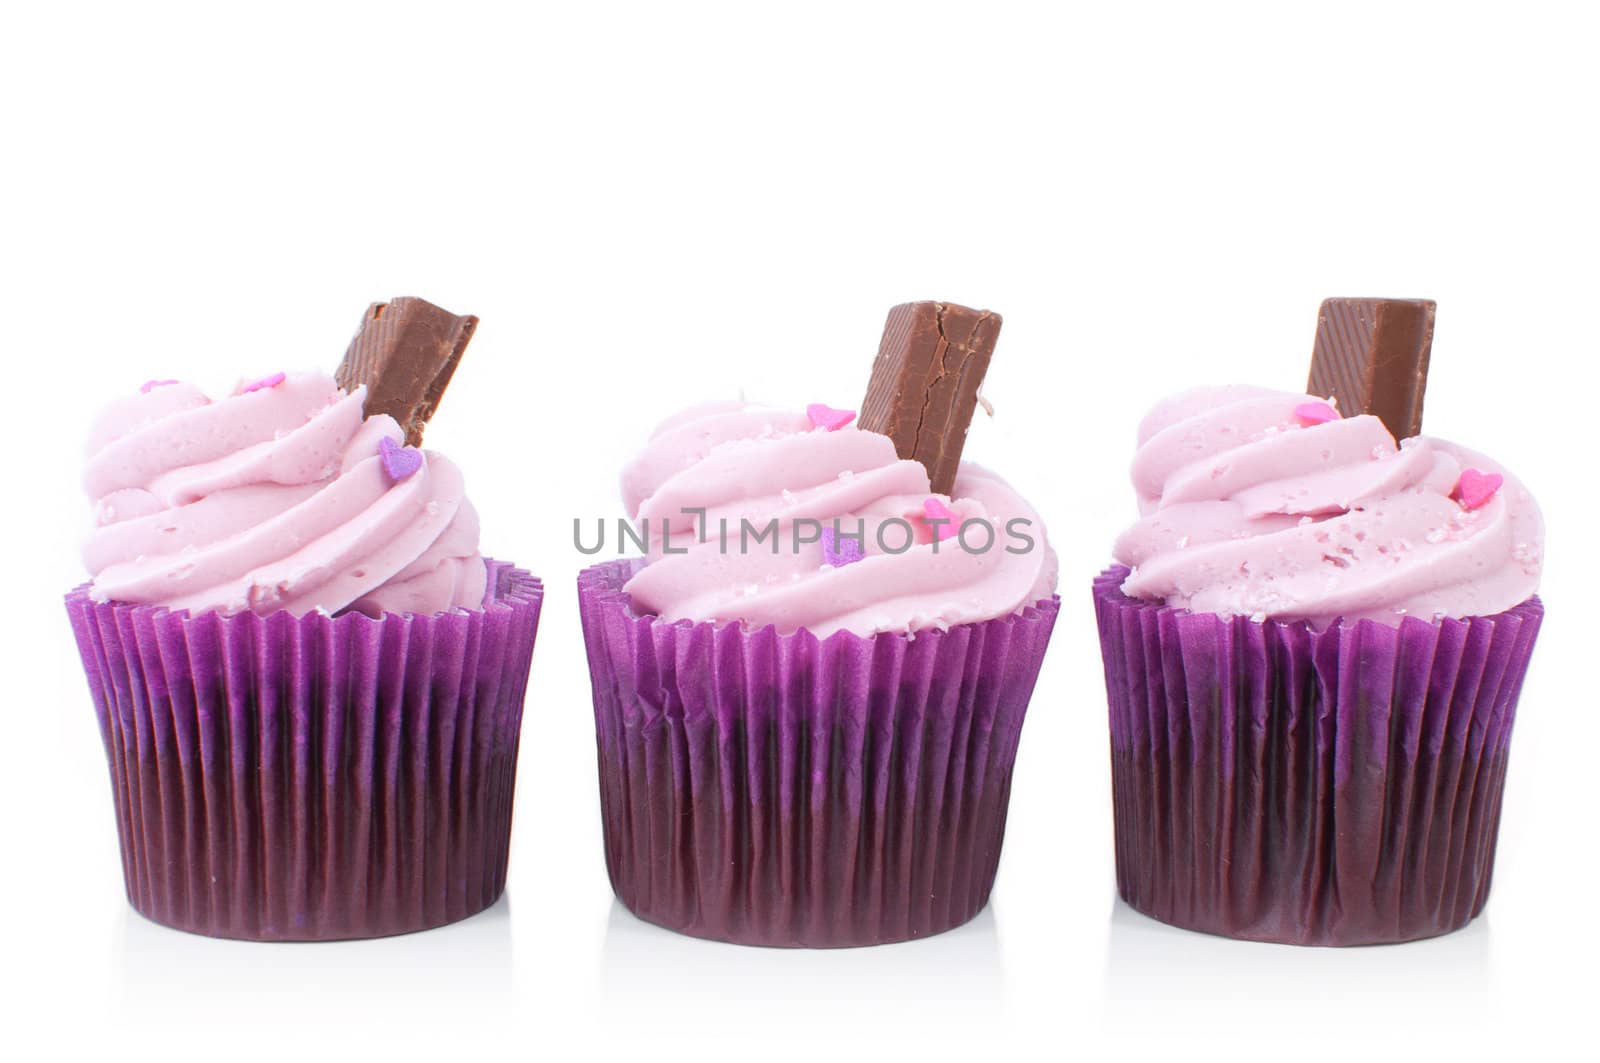 Delicious pink cupcakes with chocolate sticks on a white background